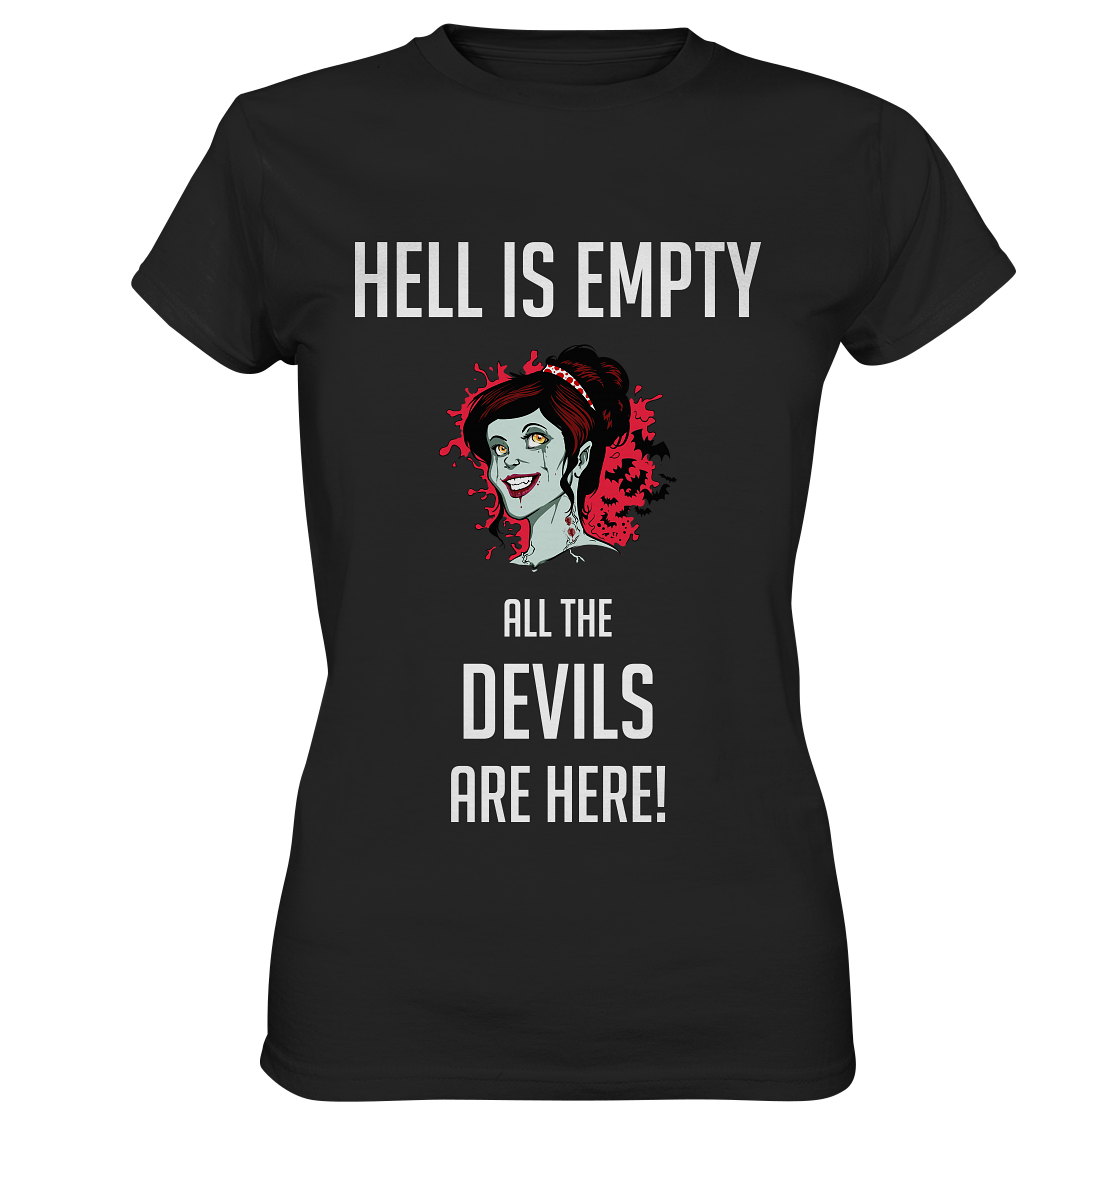 Hell is empty. All the devils are here. - Ladies Premium Shirt